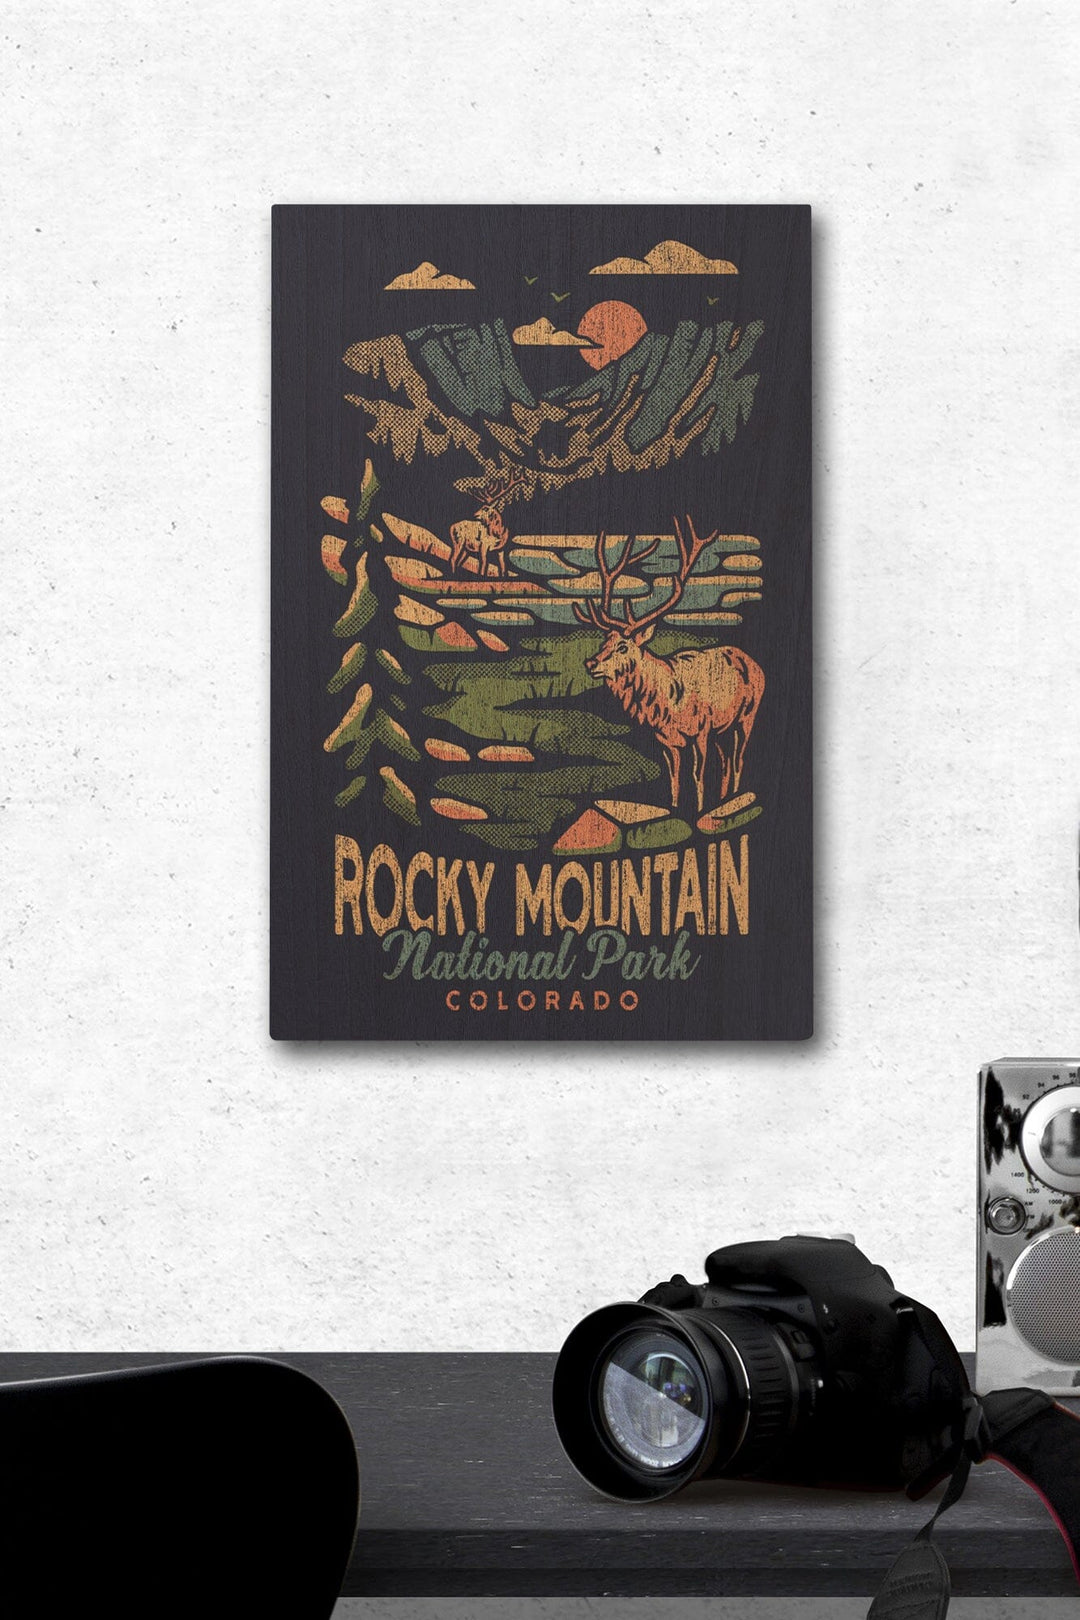 Rocky Mountain National Park, Colorado, Distressed Vector, Lantern Press Artwork, Wood Signs and Postcards Wood Lantern Press 12 x 18 Wood Gallery Print 